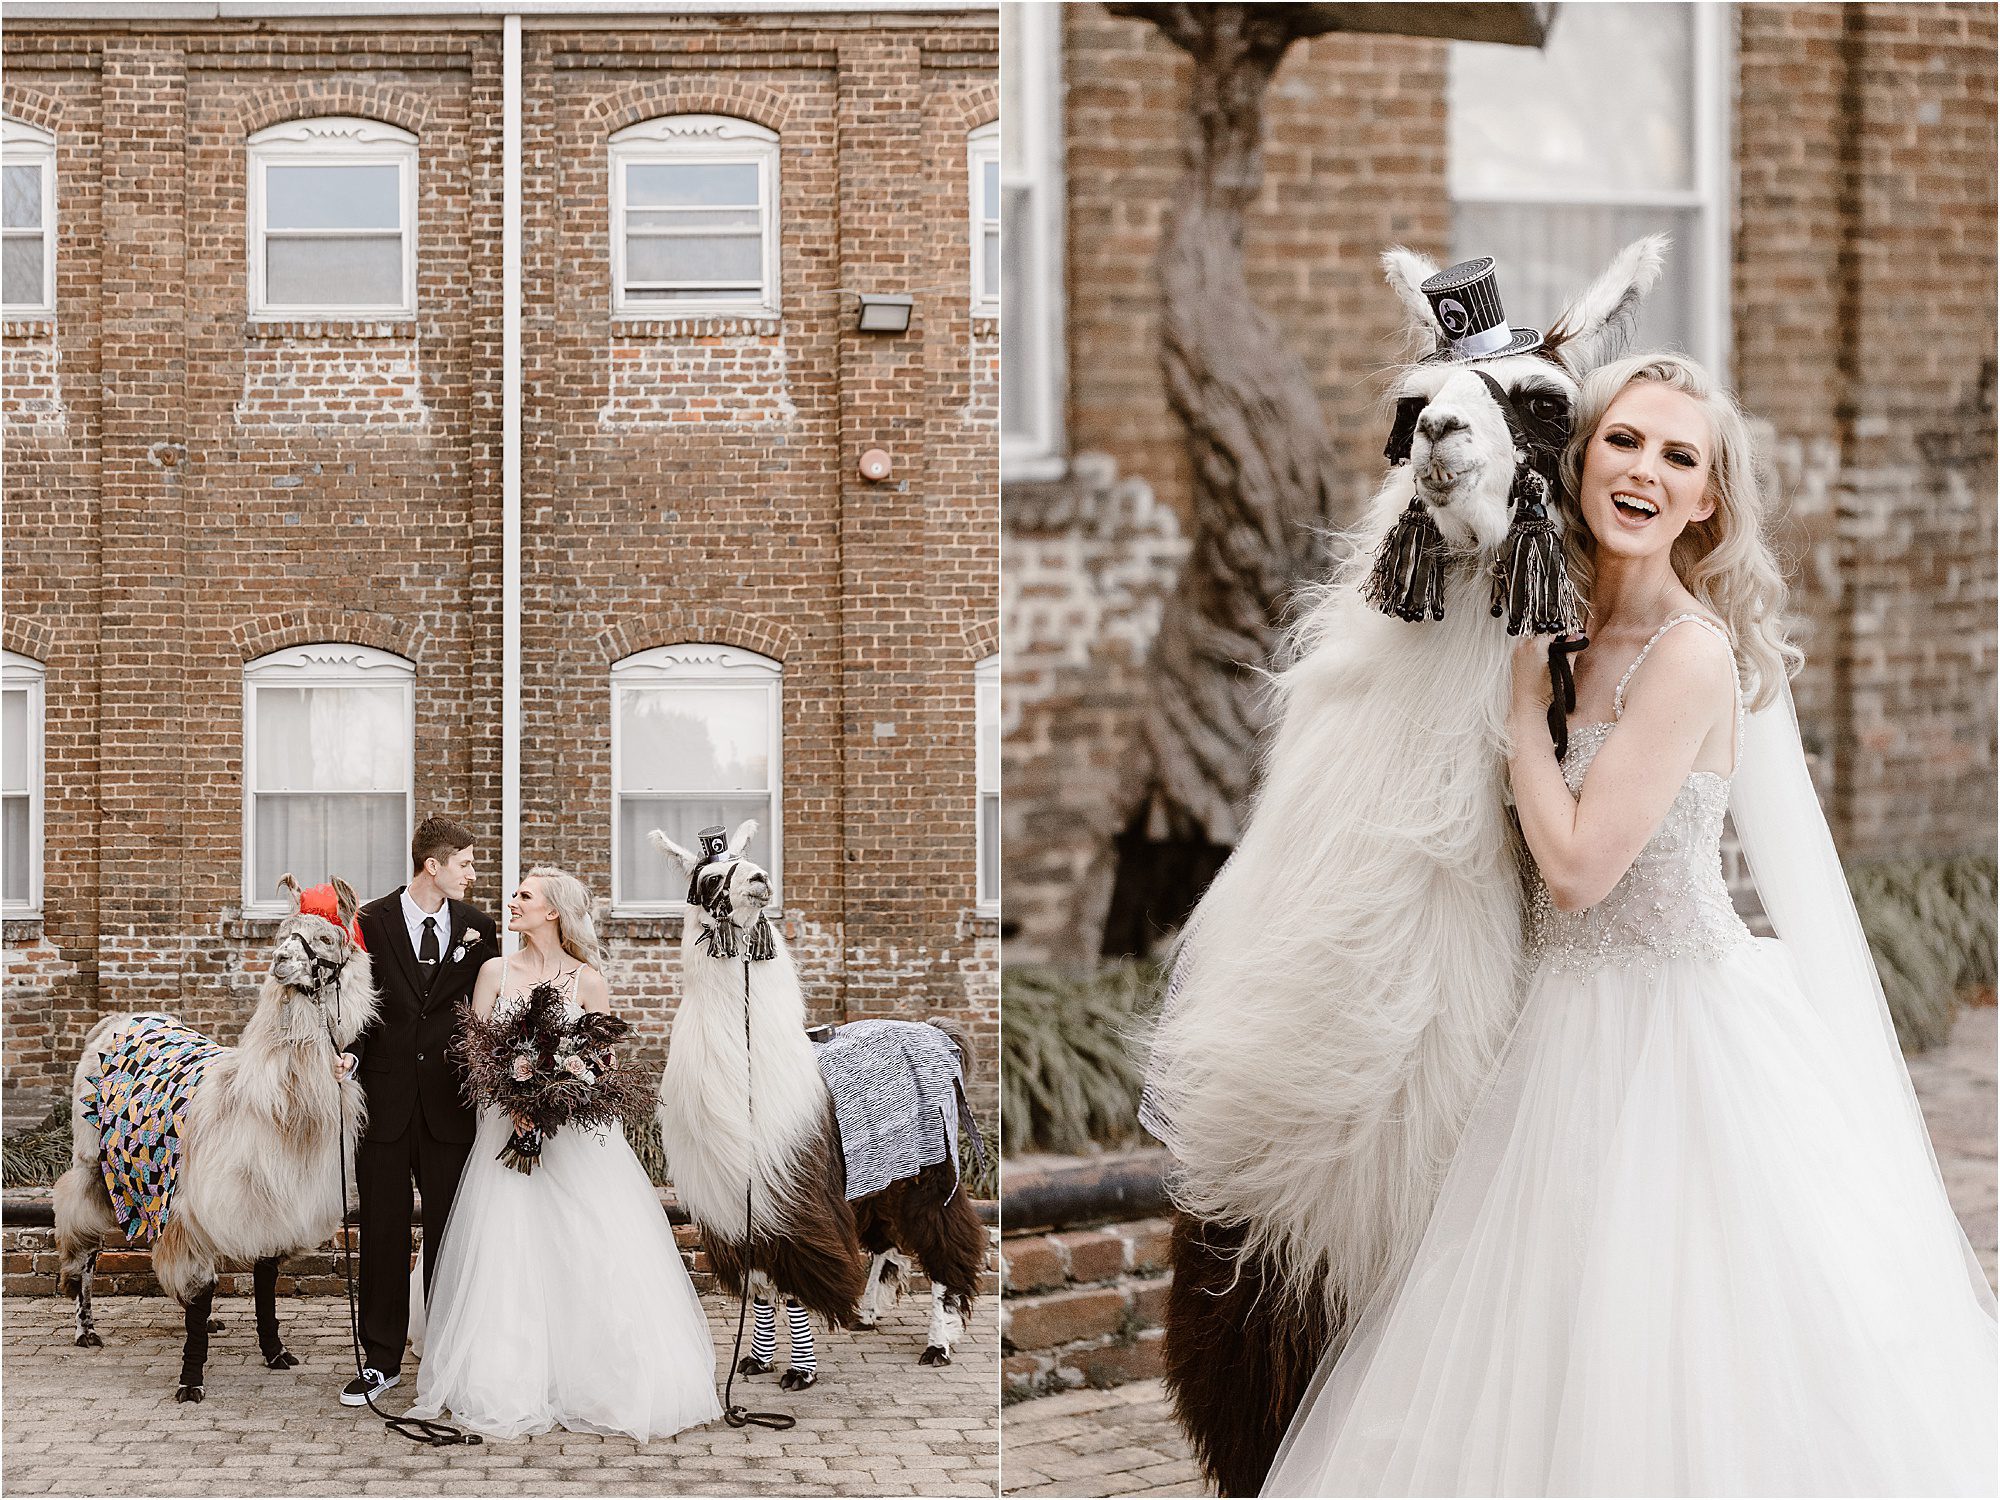 Wedding with Llamas as flower girl and ring bearer